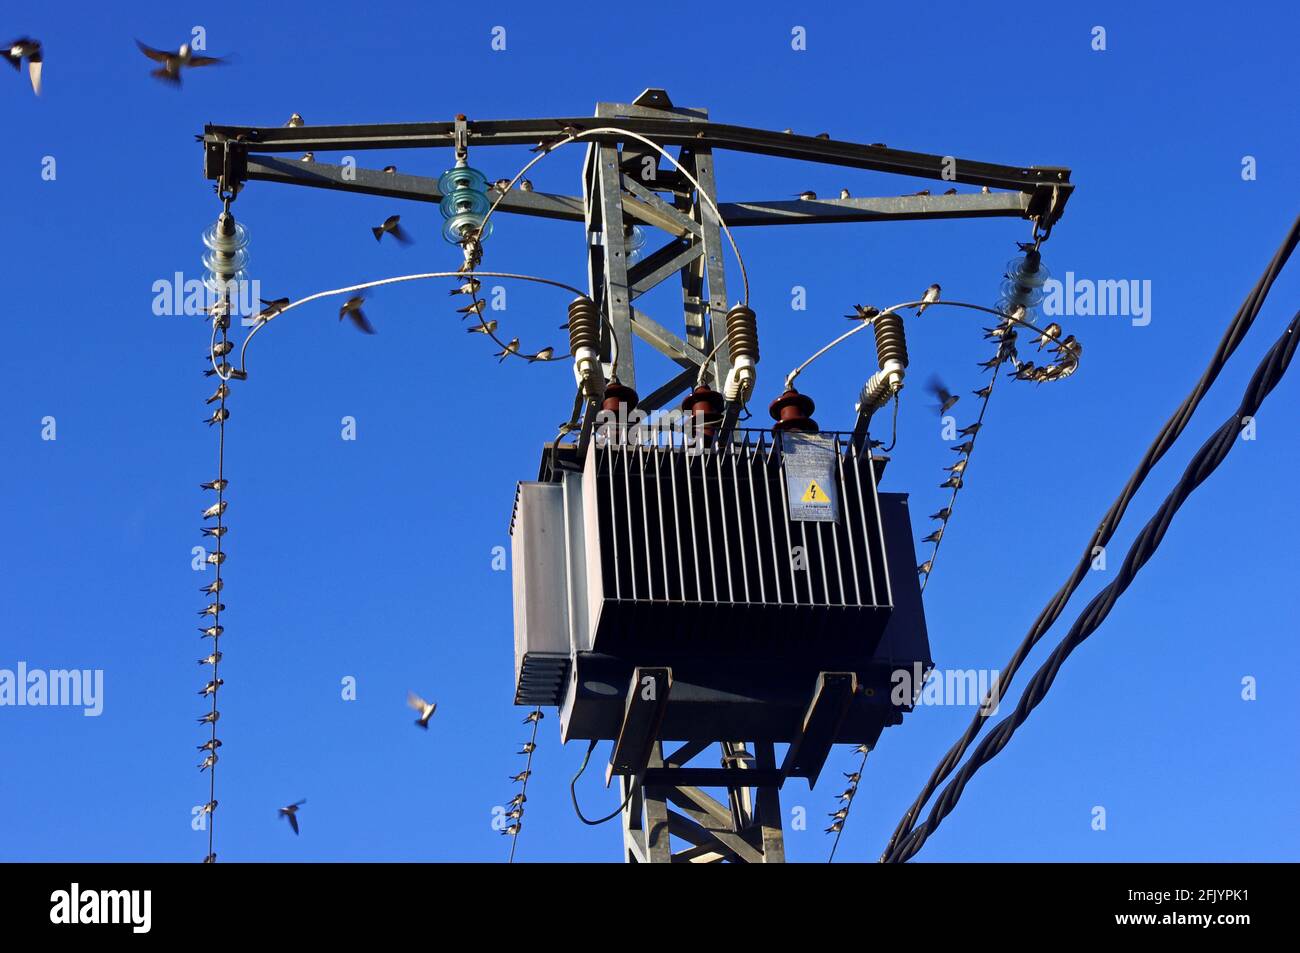 Low angle shot of a pole-mounted electric transformer on the blue sky background Stock Photo